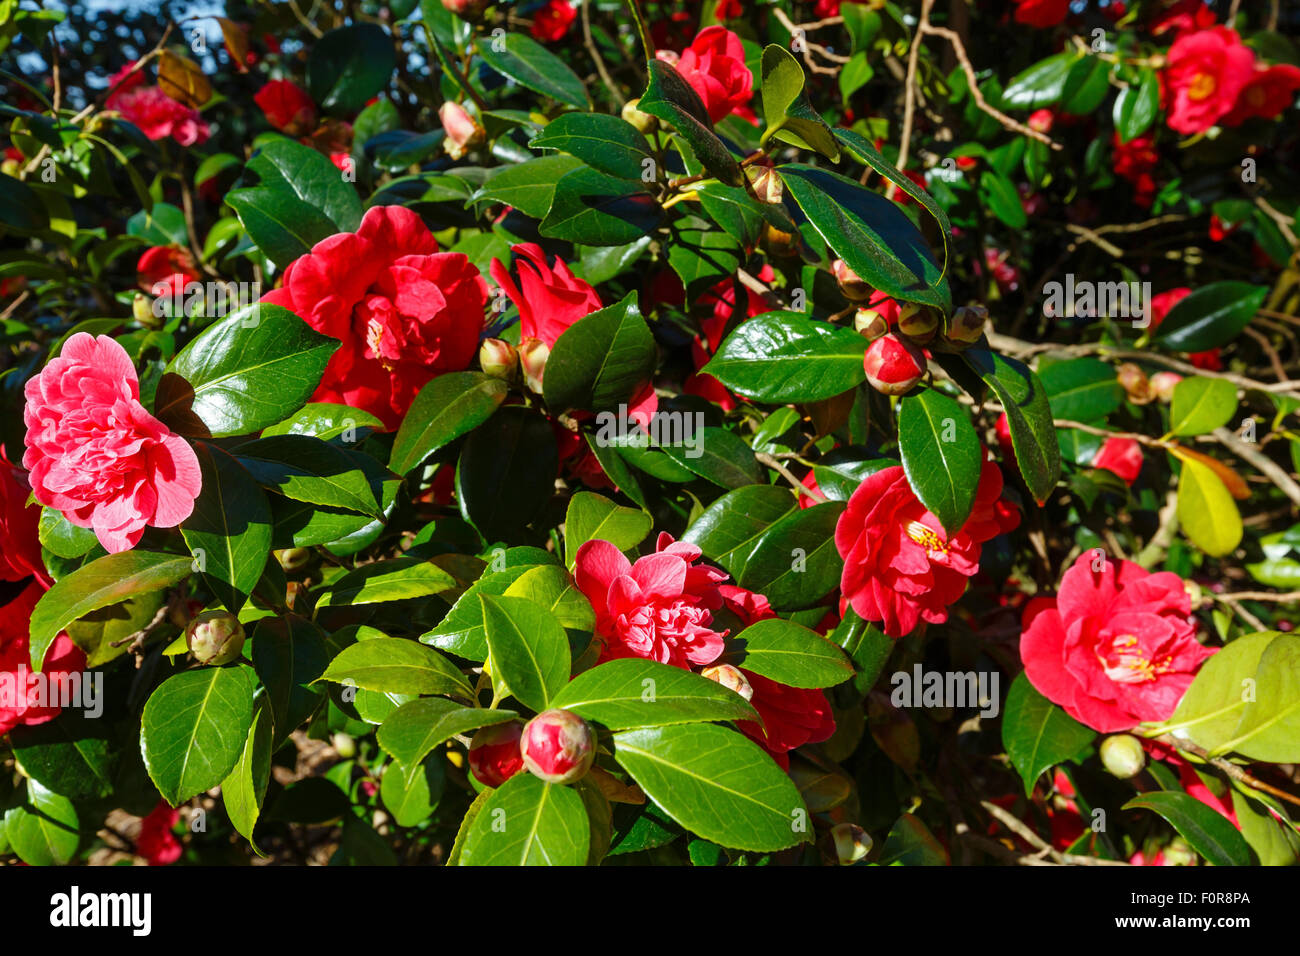 Blossoming Camellia bush with red flowers and thick leaves in spring. Stock Photo